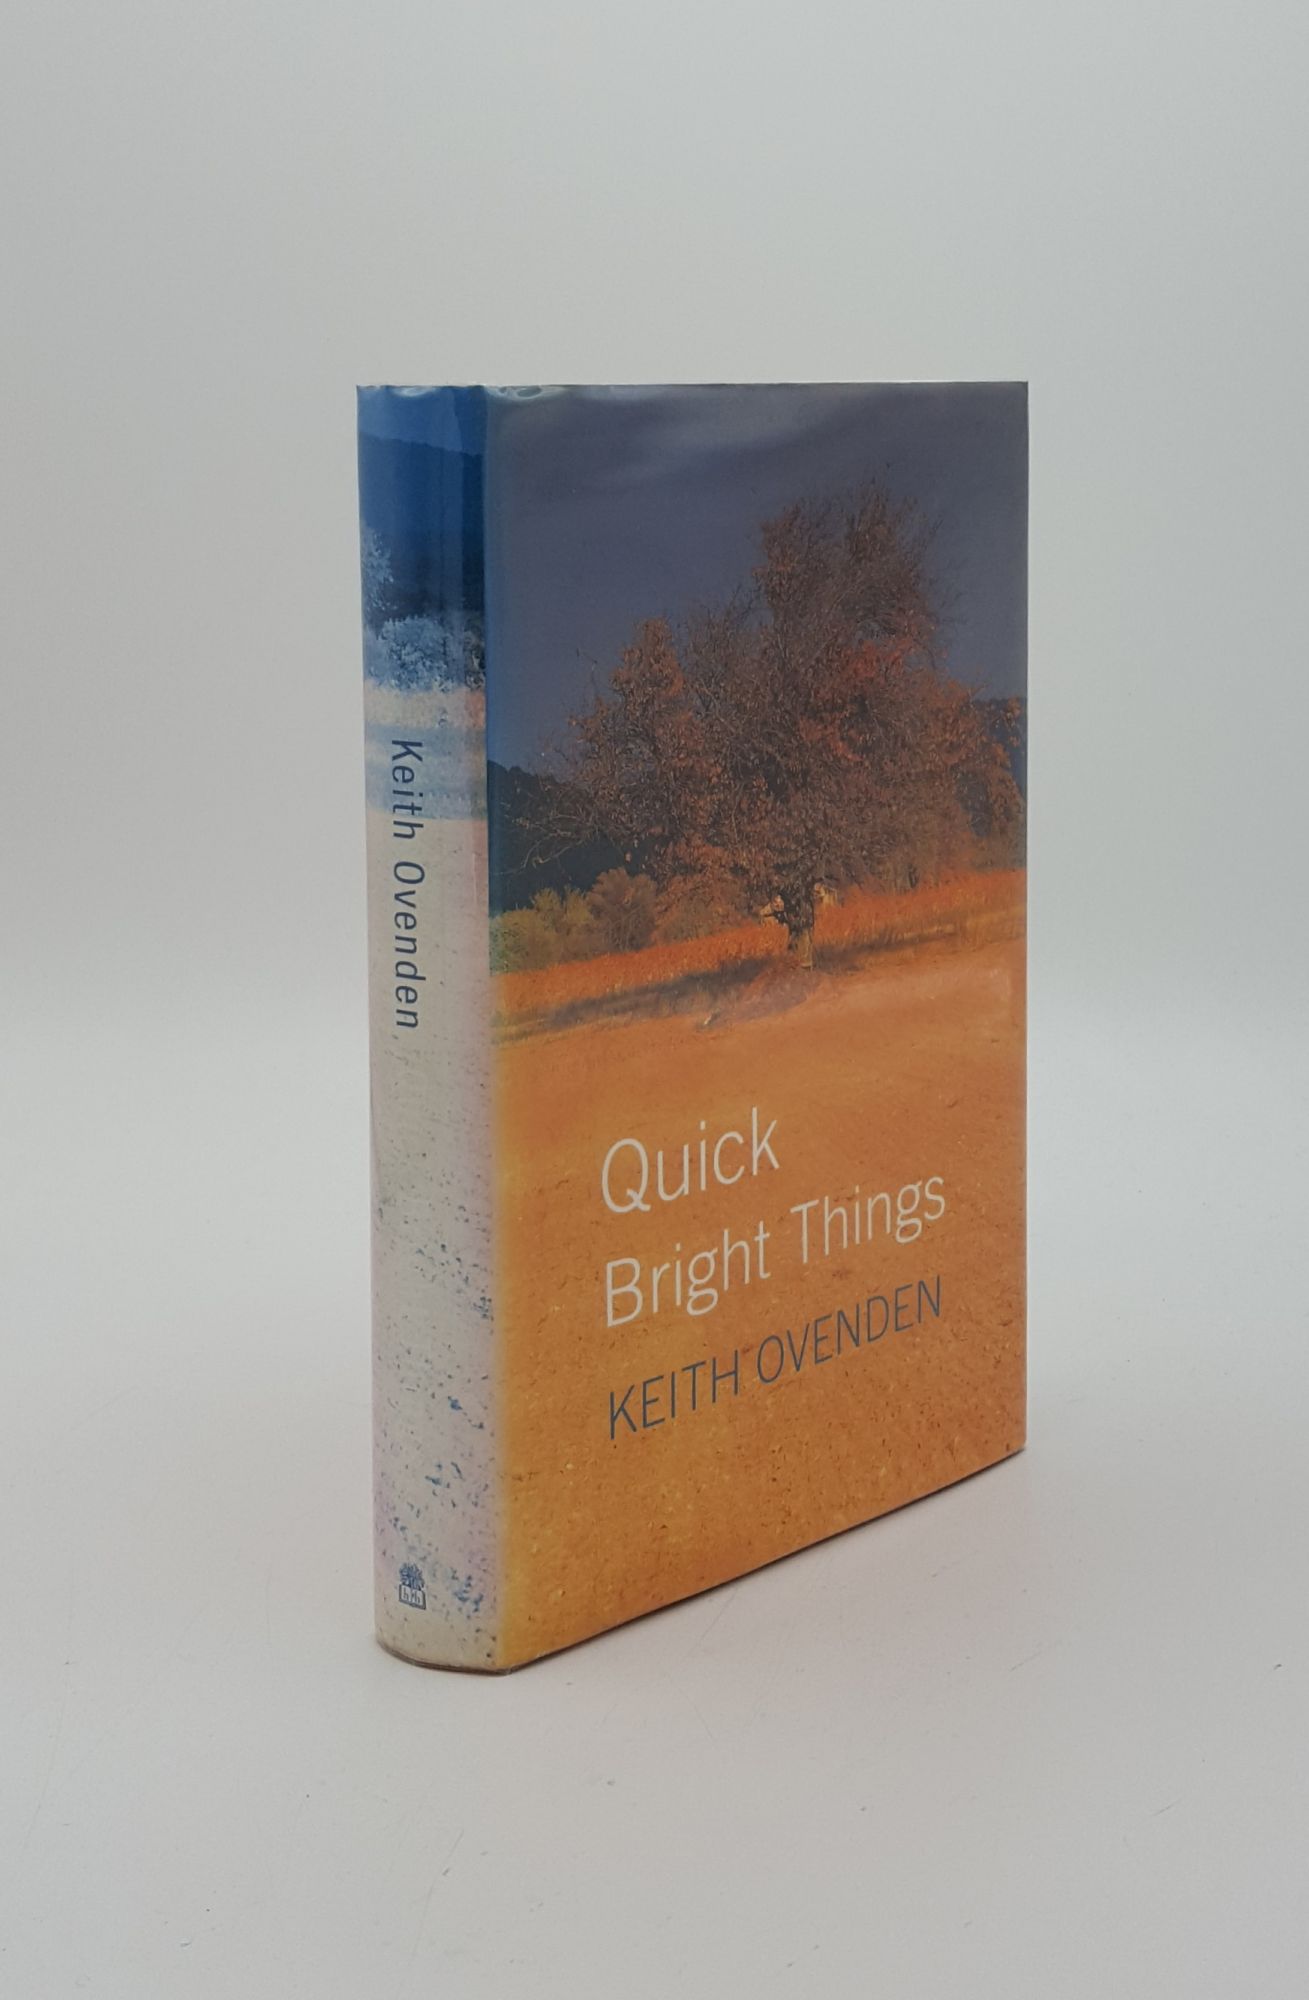 QUICK BRIGHT THINGS - OVENDEN Keith